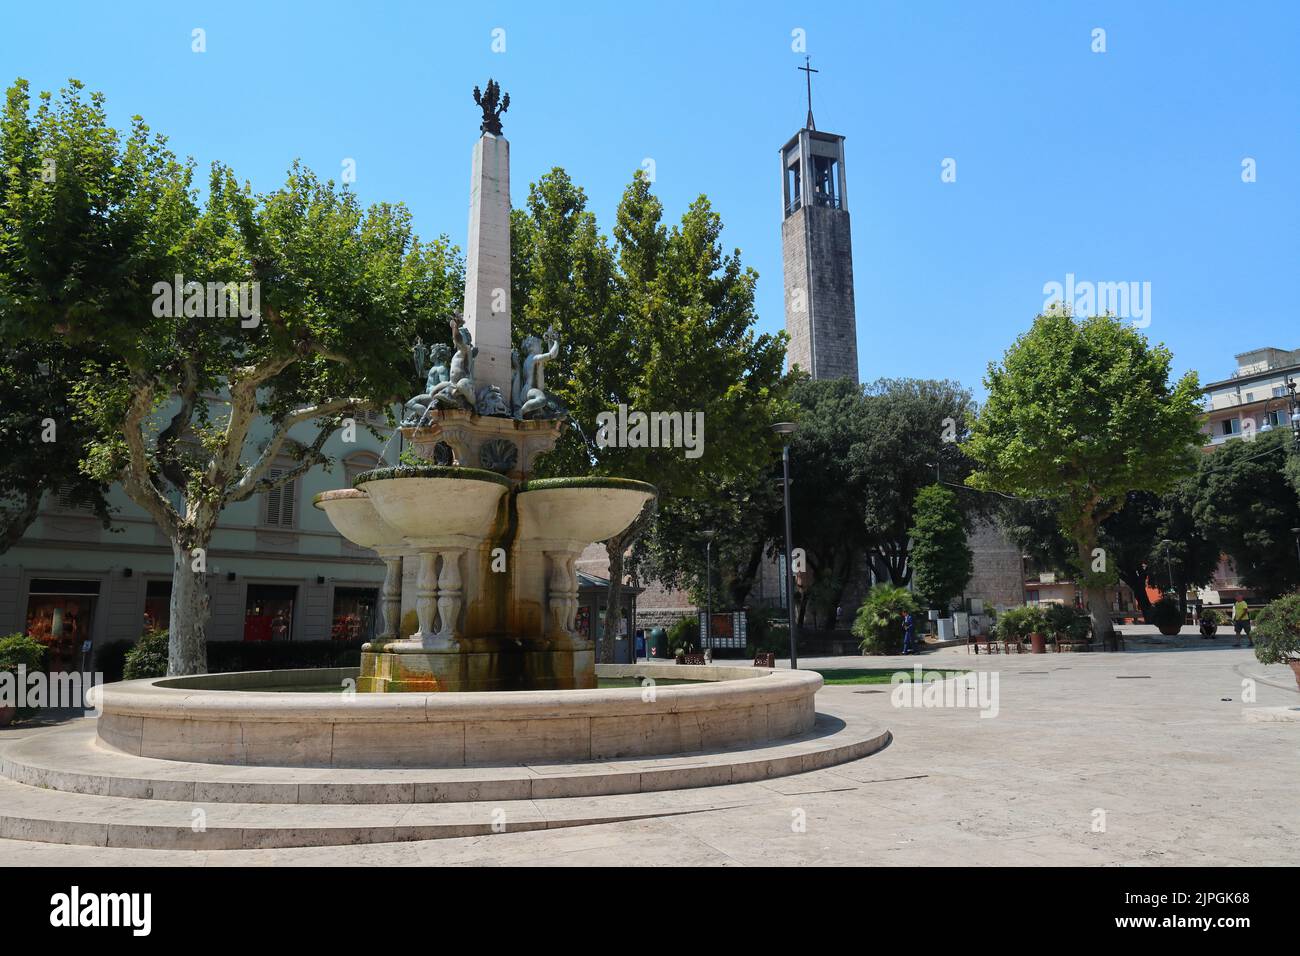 A Fountain and a Modern Church Spire in the center of Montecatini Terme, Tuscany, Italy. Stock Photo